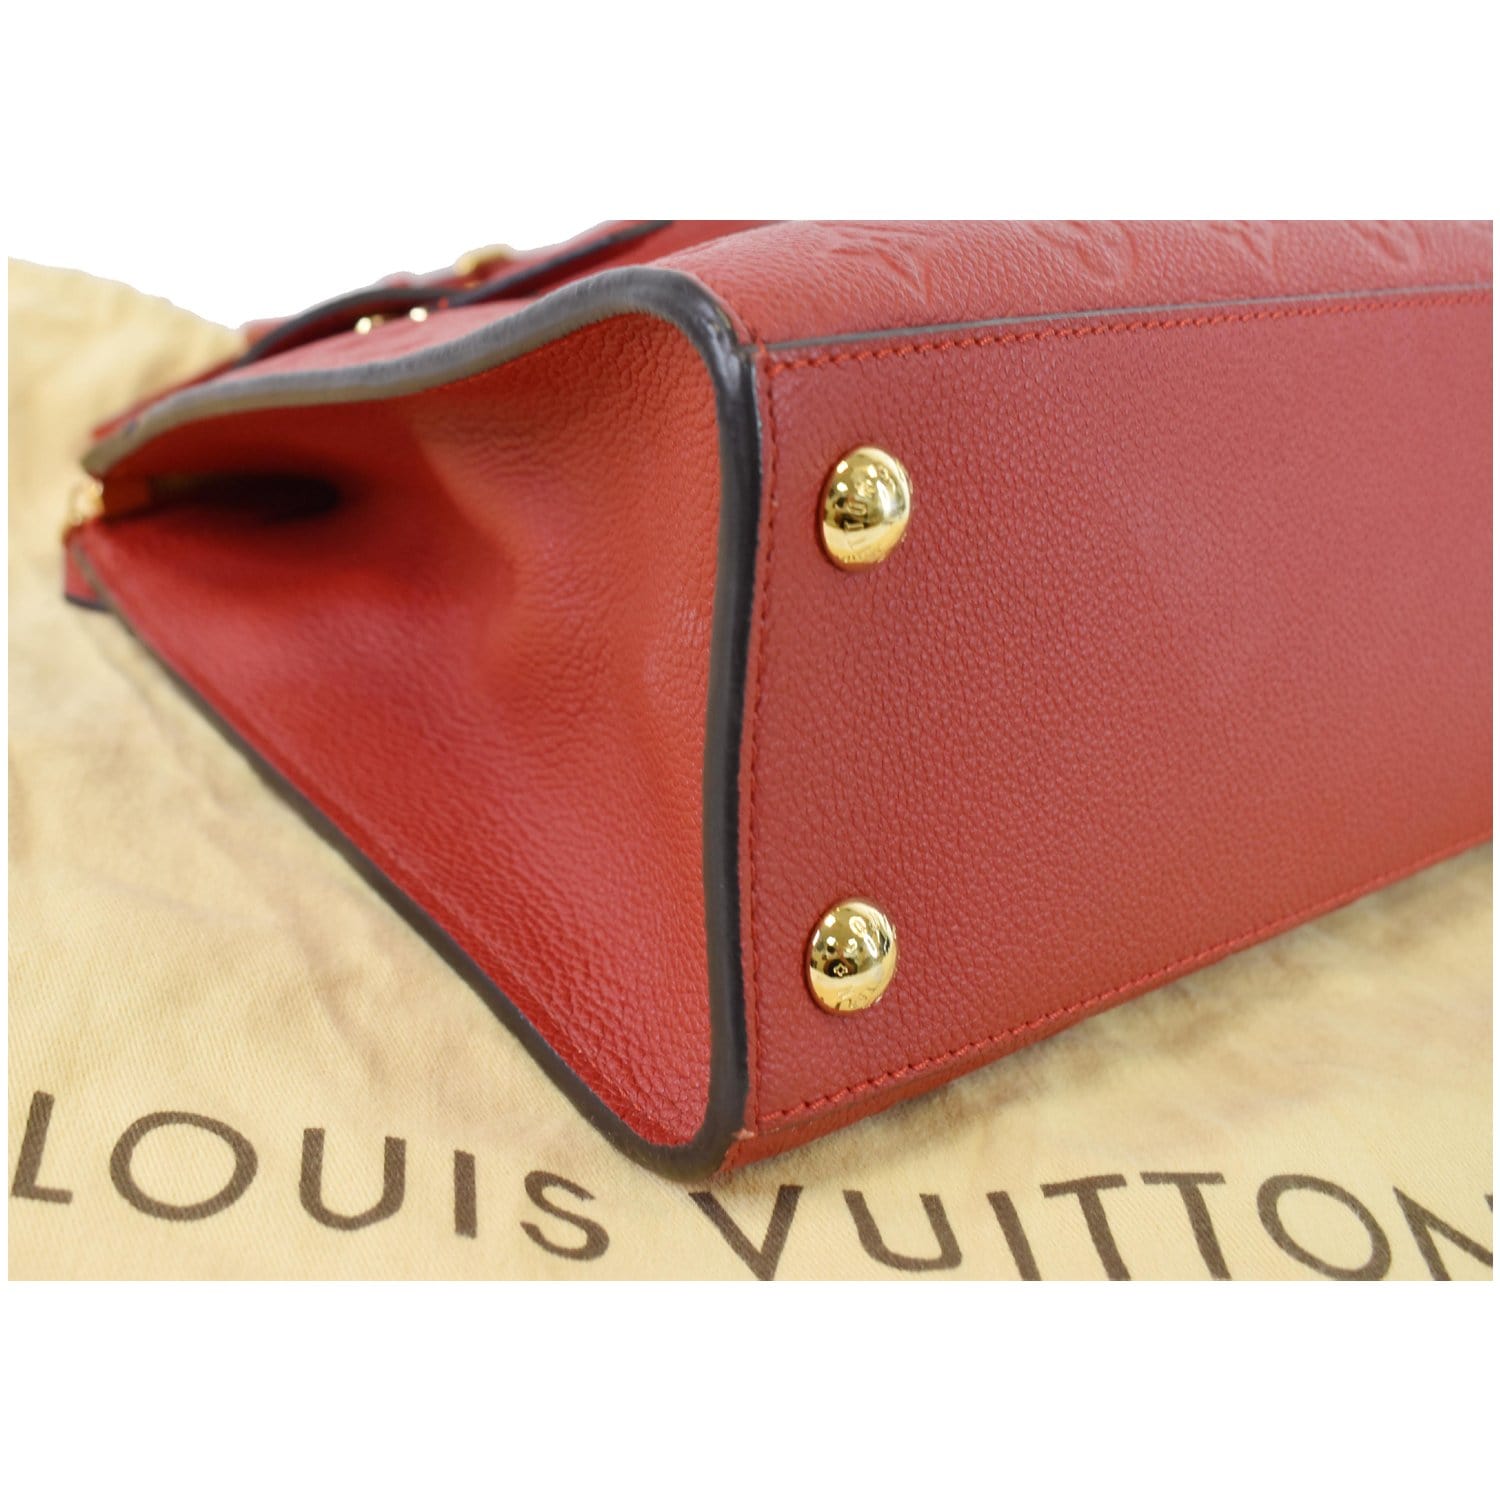 Are Louis Vuitton Bags Materials Leather?